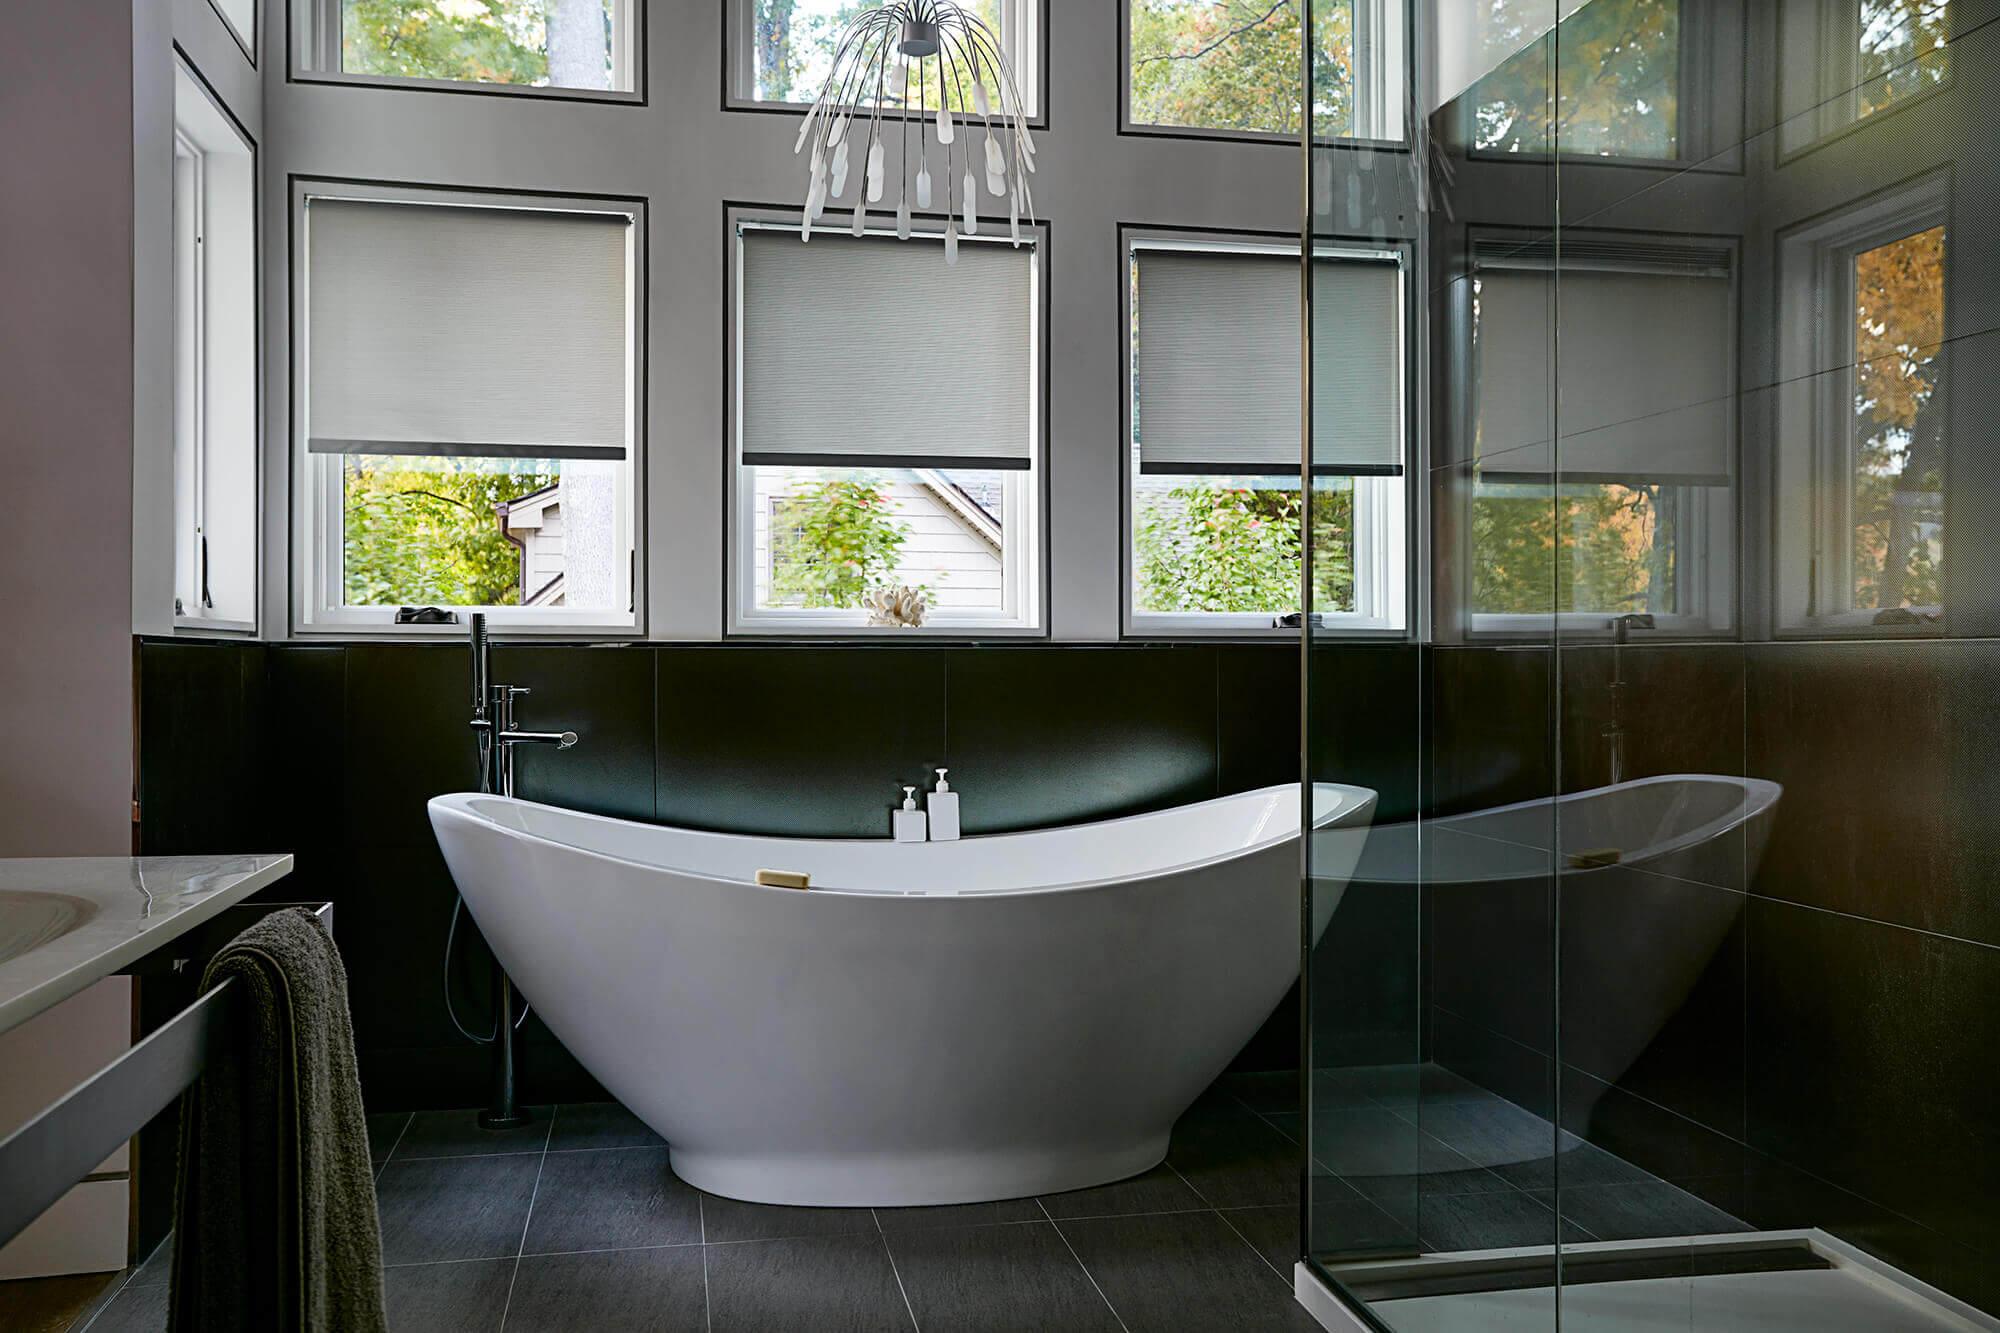 A modern bathroom with a free standing tub and glass shower has three windows covered with roller shades behind the tub